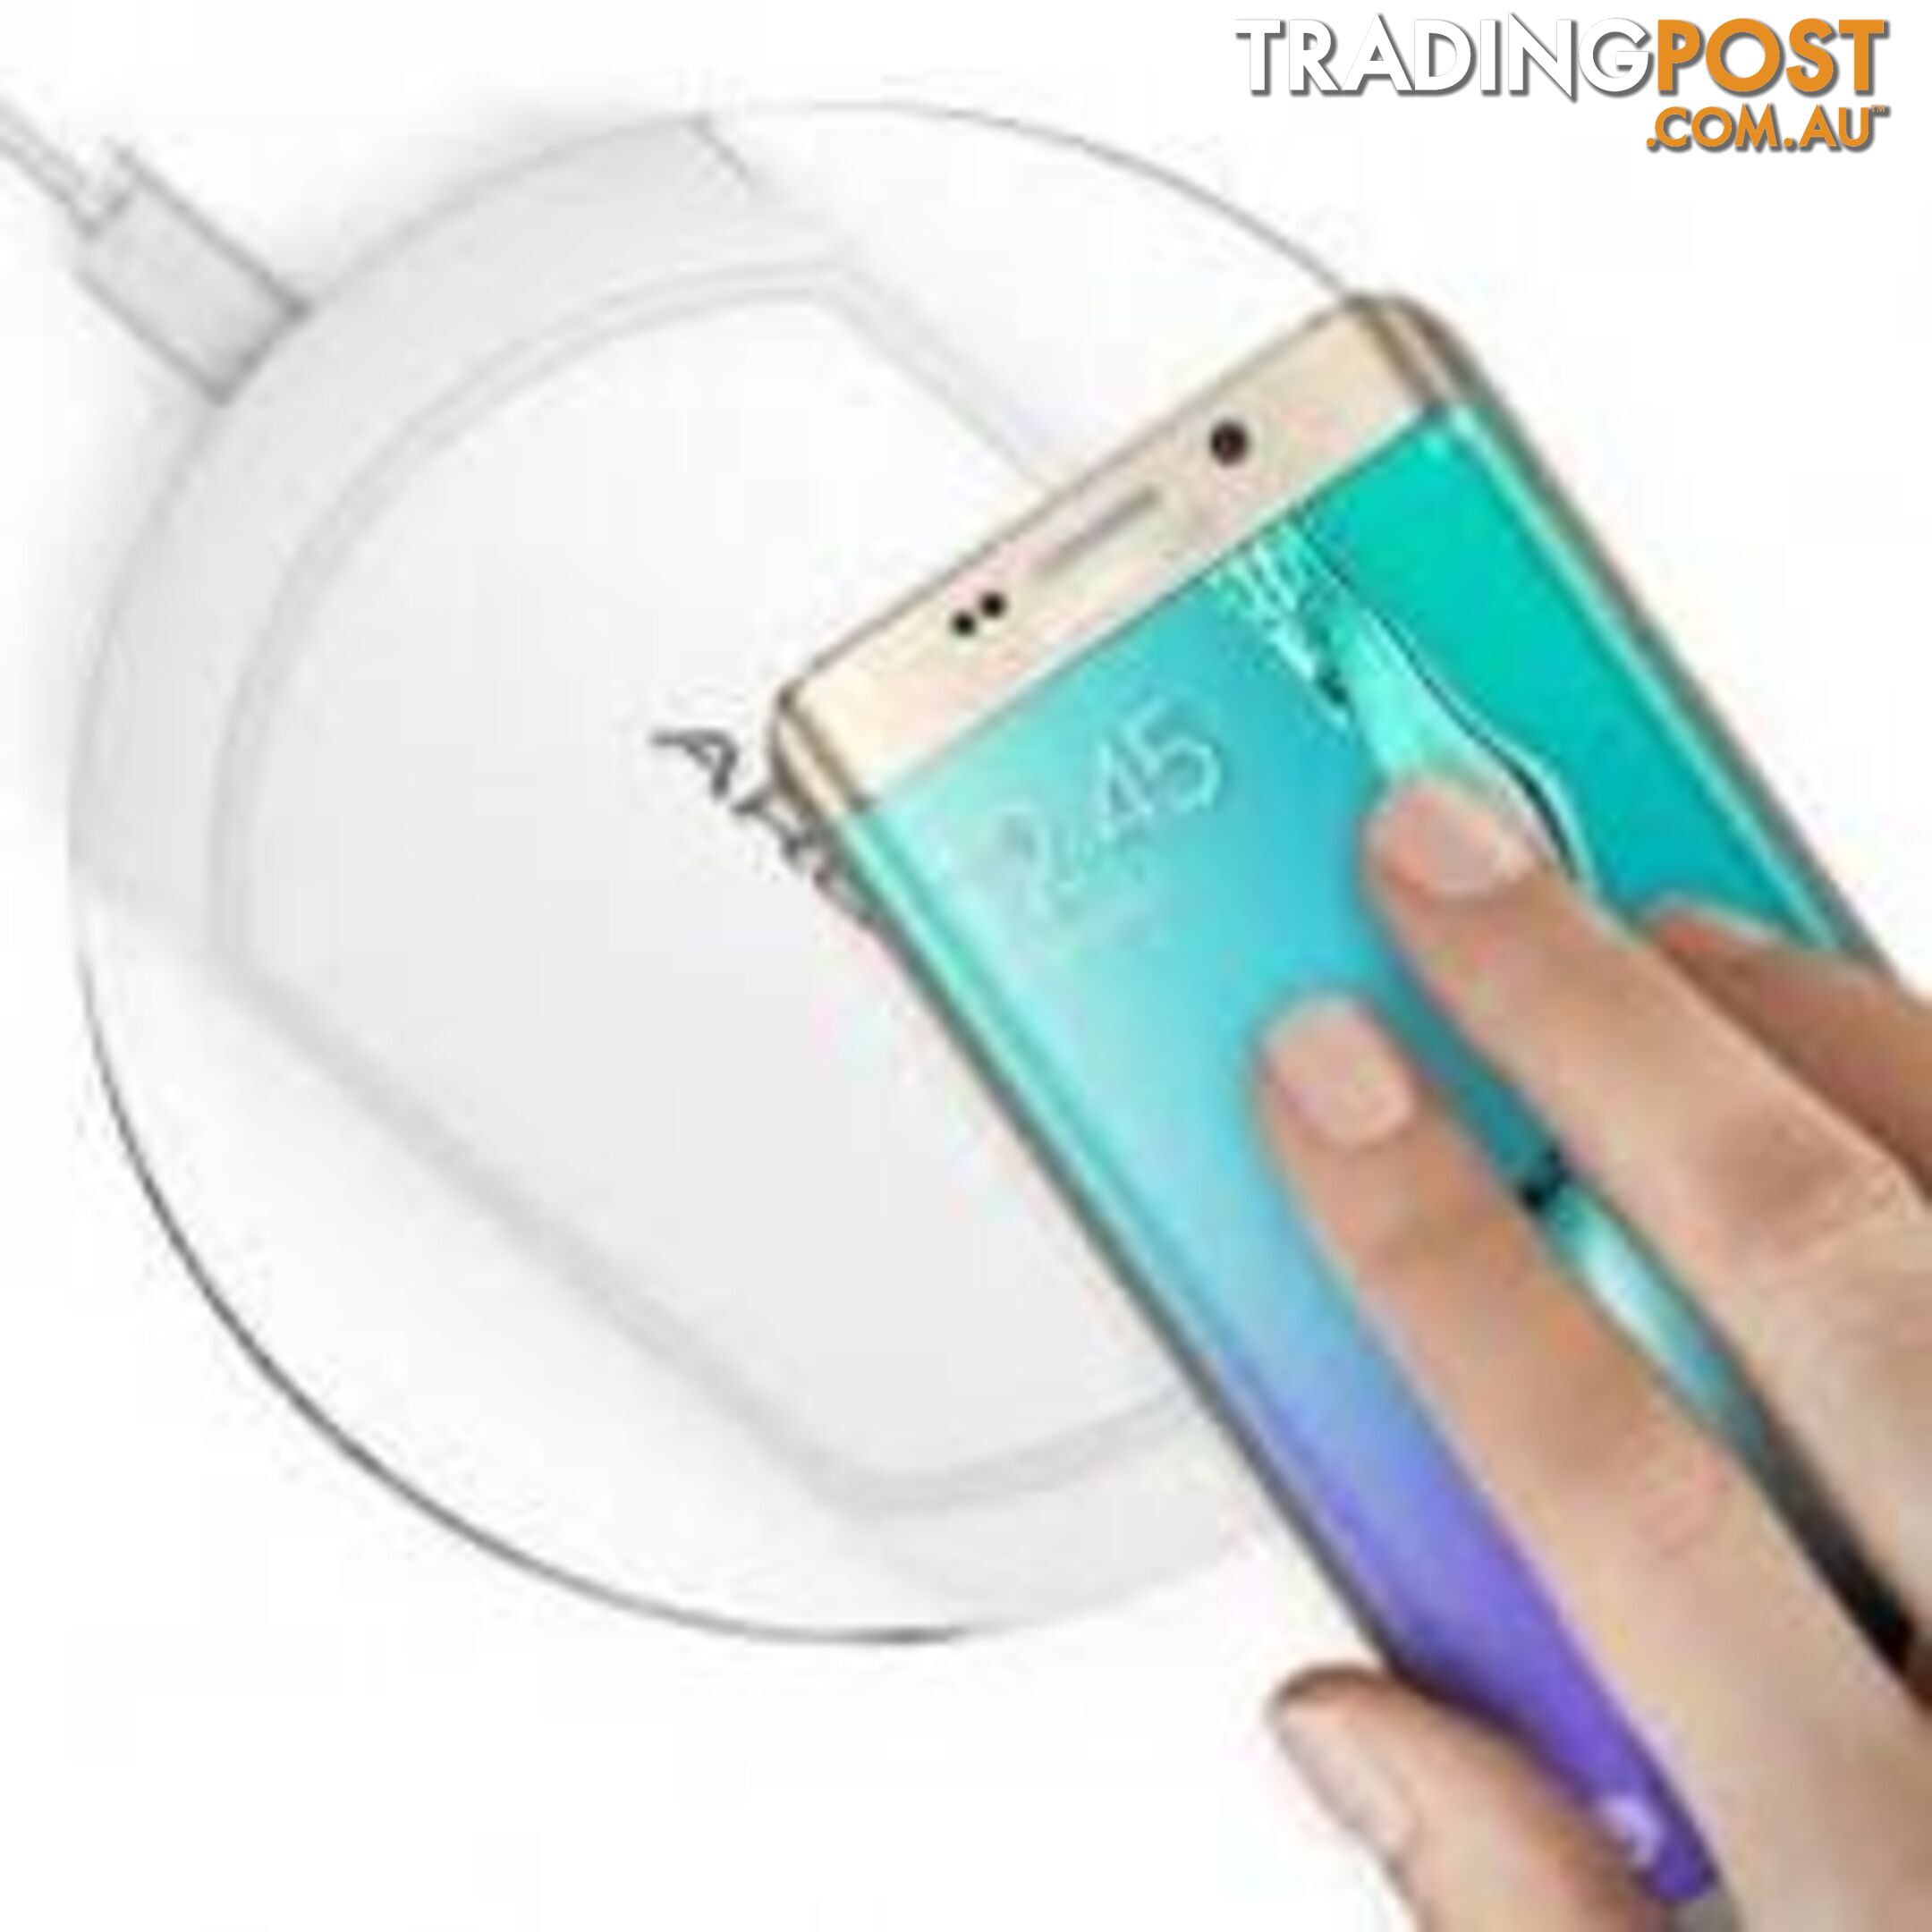 ABS Touch 1 Wireless Charging Pad - 4BC57B - Charging & Power